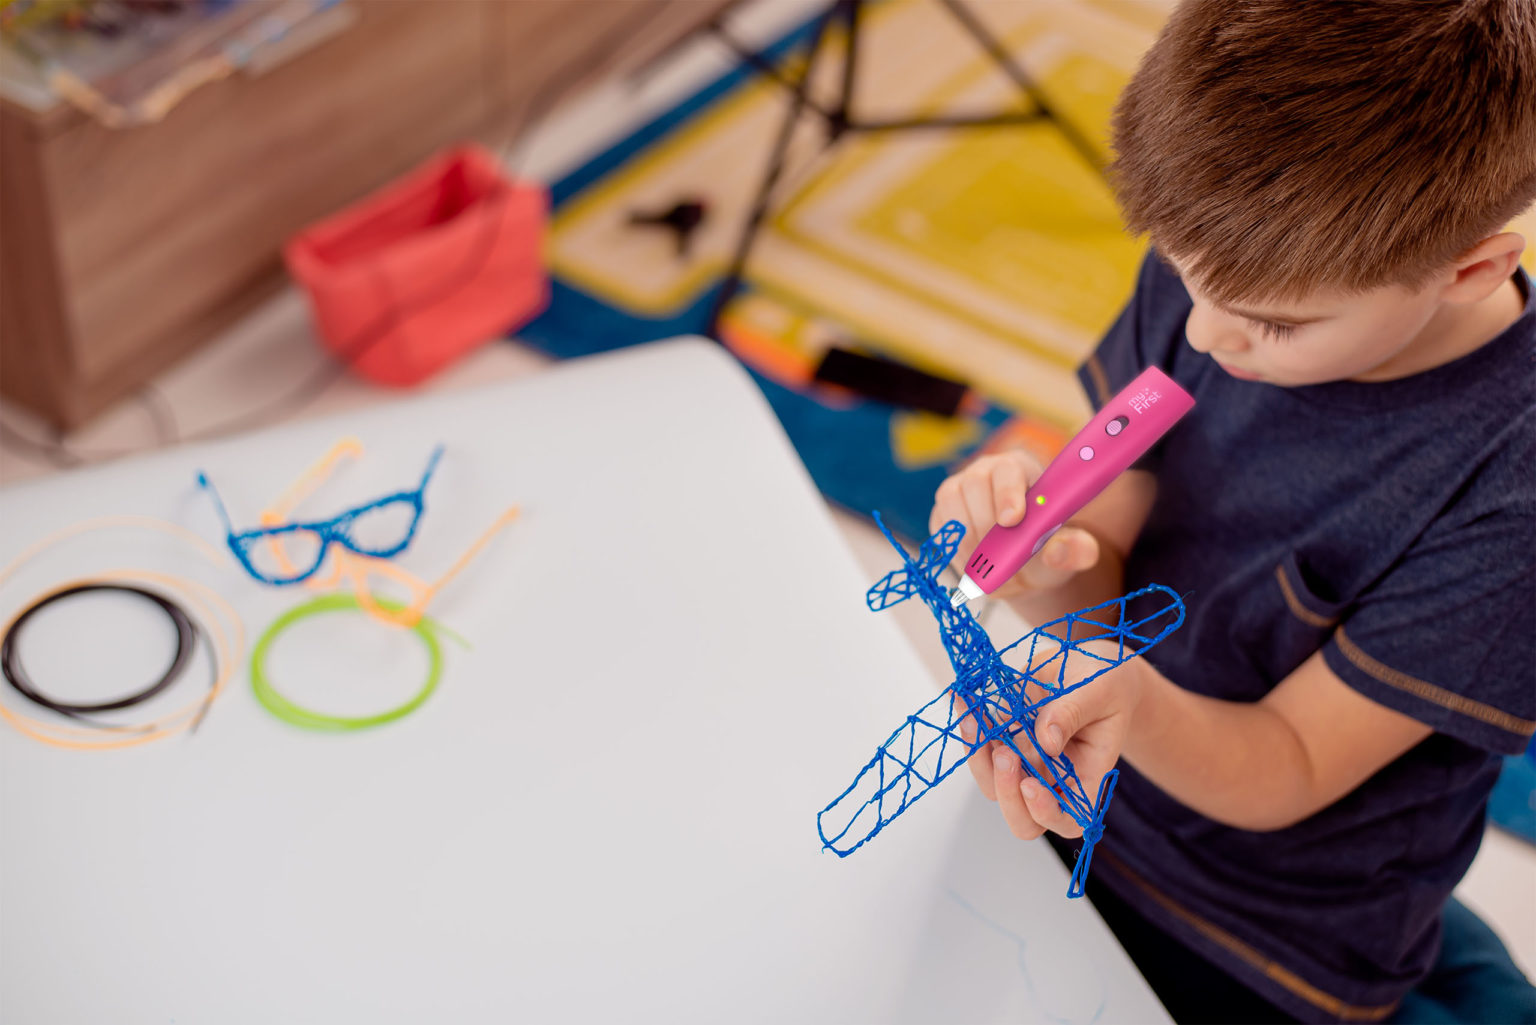 3D Pen for Kids: How to Choose the Best One for Your Child